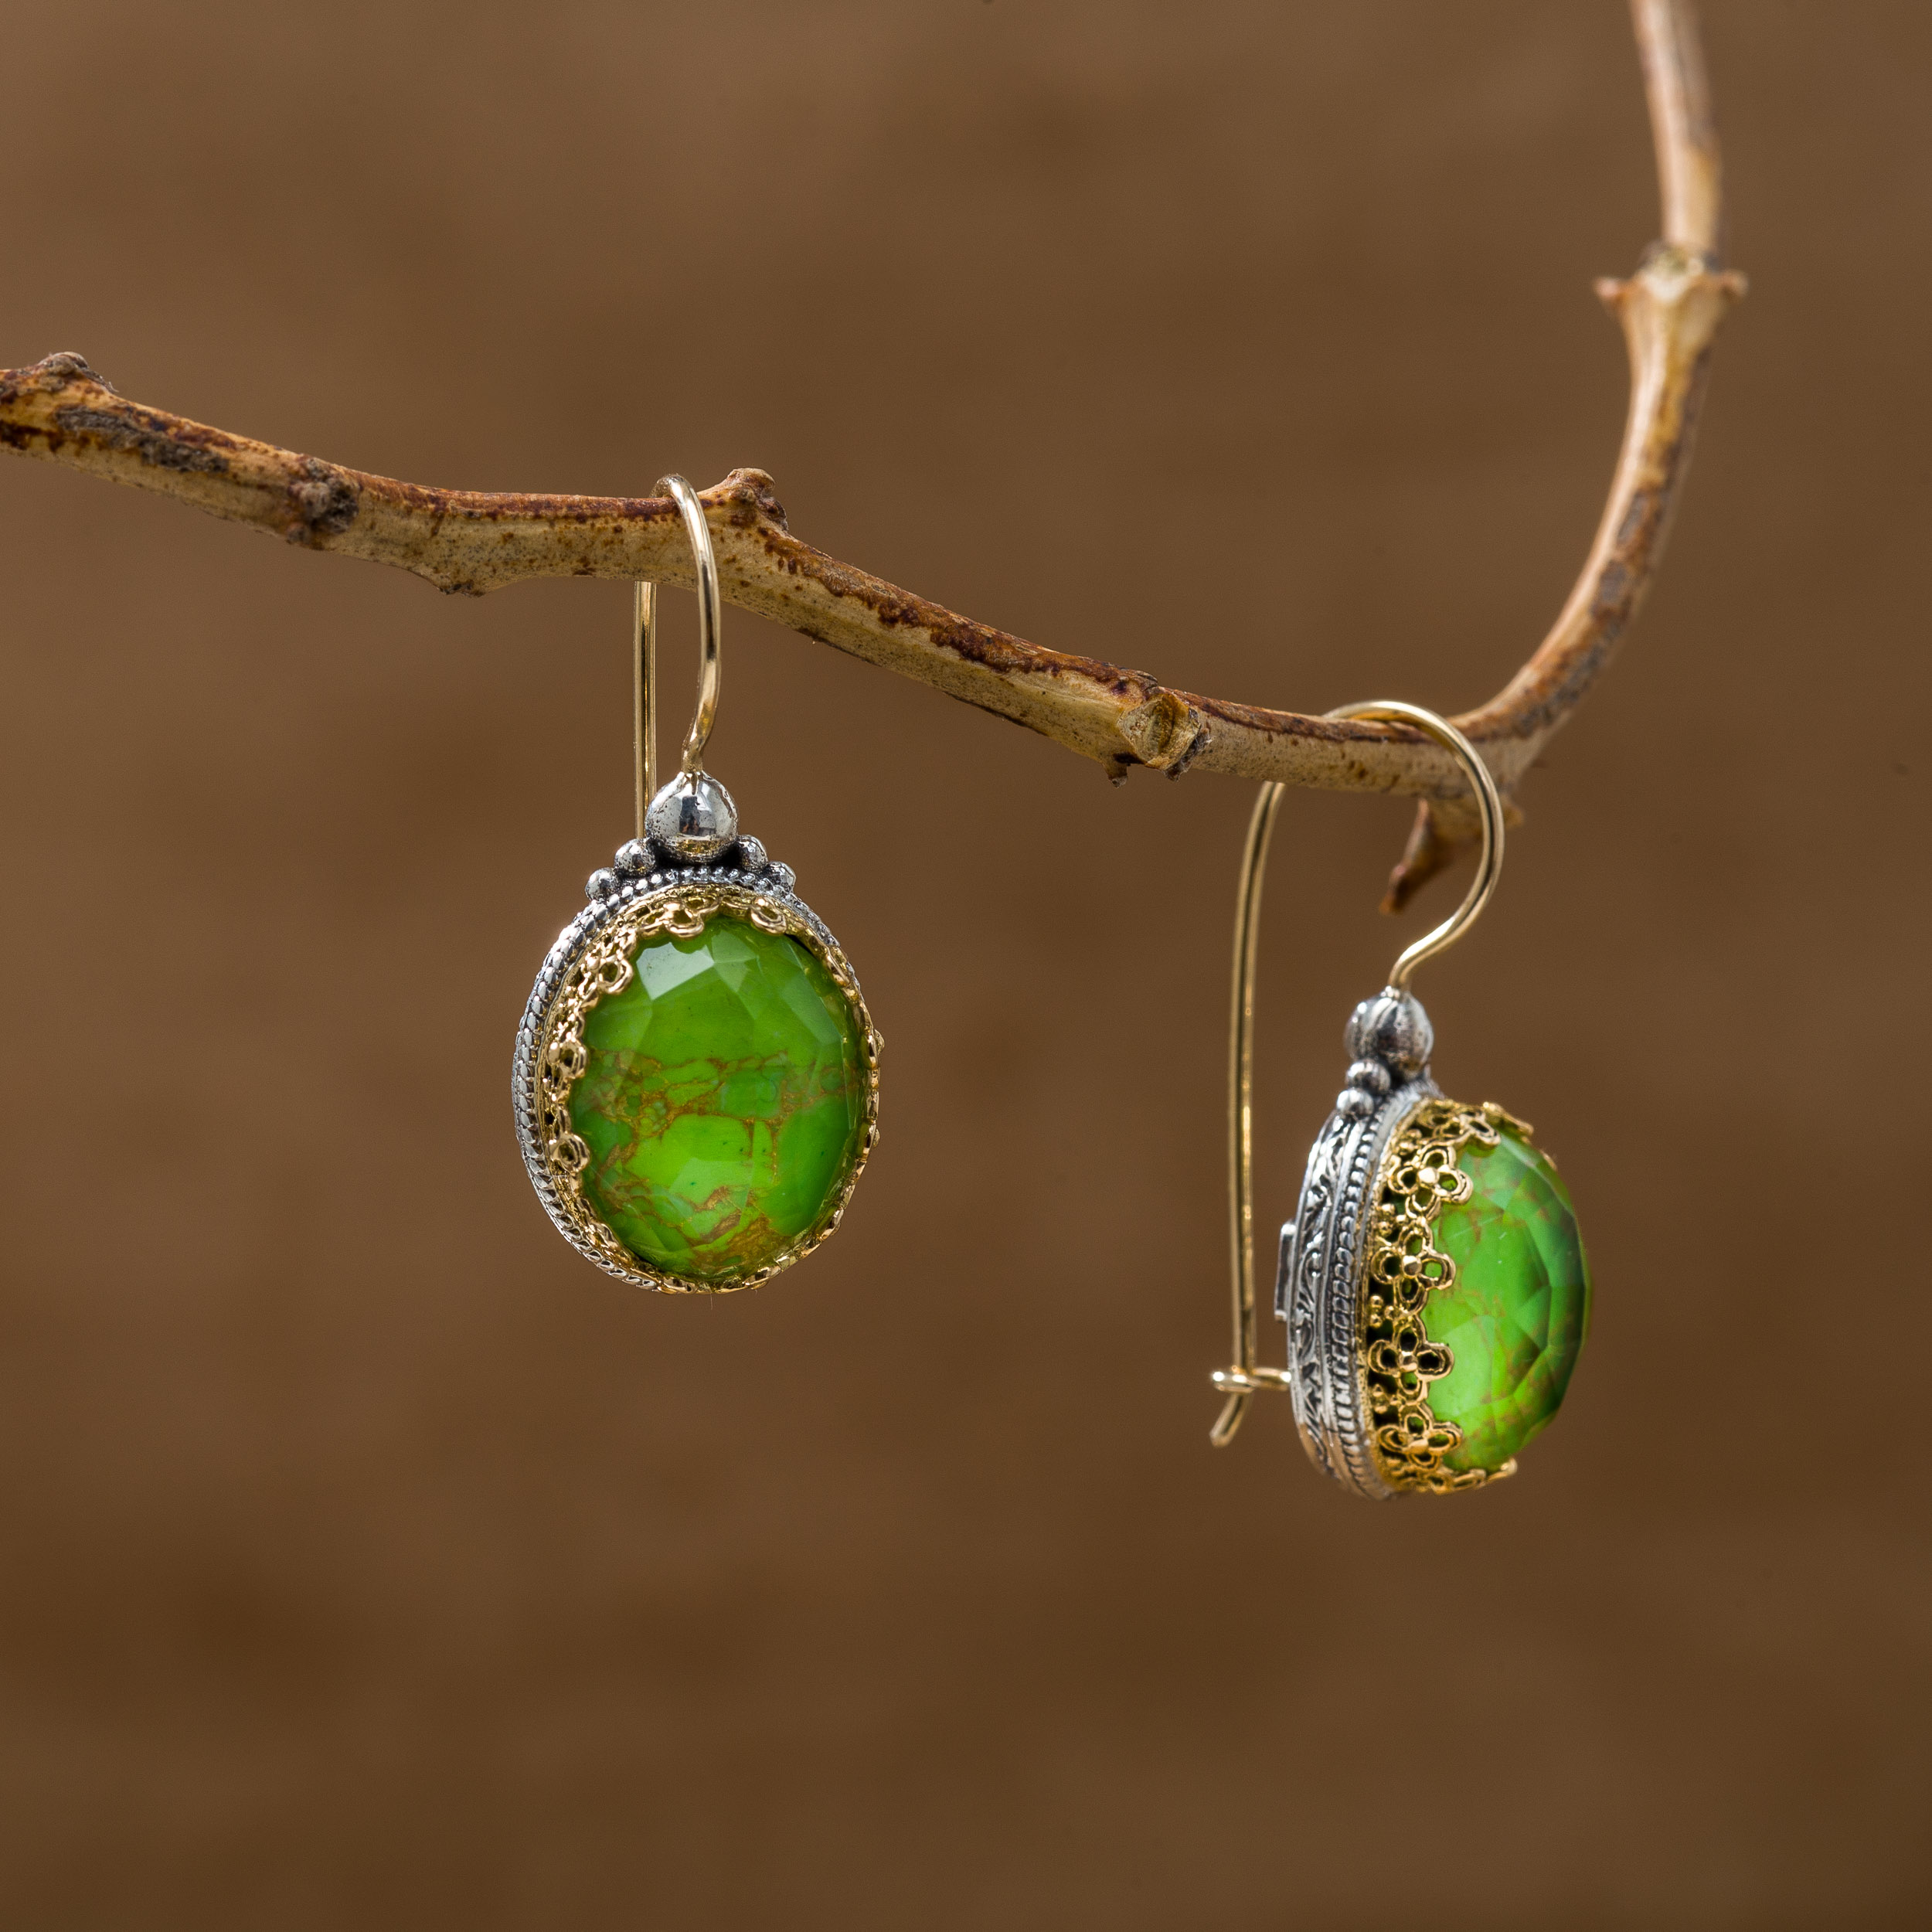 Aegean Colors Earrings in 18K Gold and Sterling Silver with Doublet Stone Green Copper